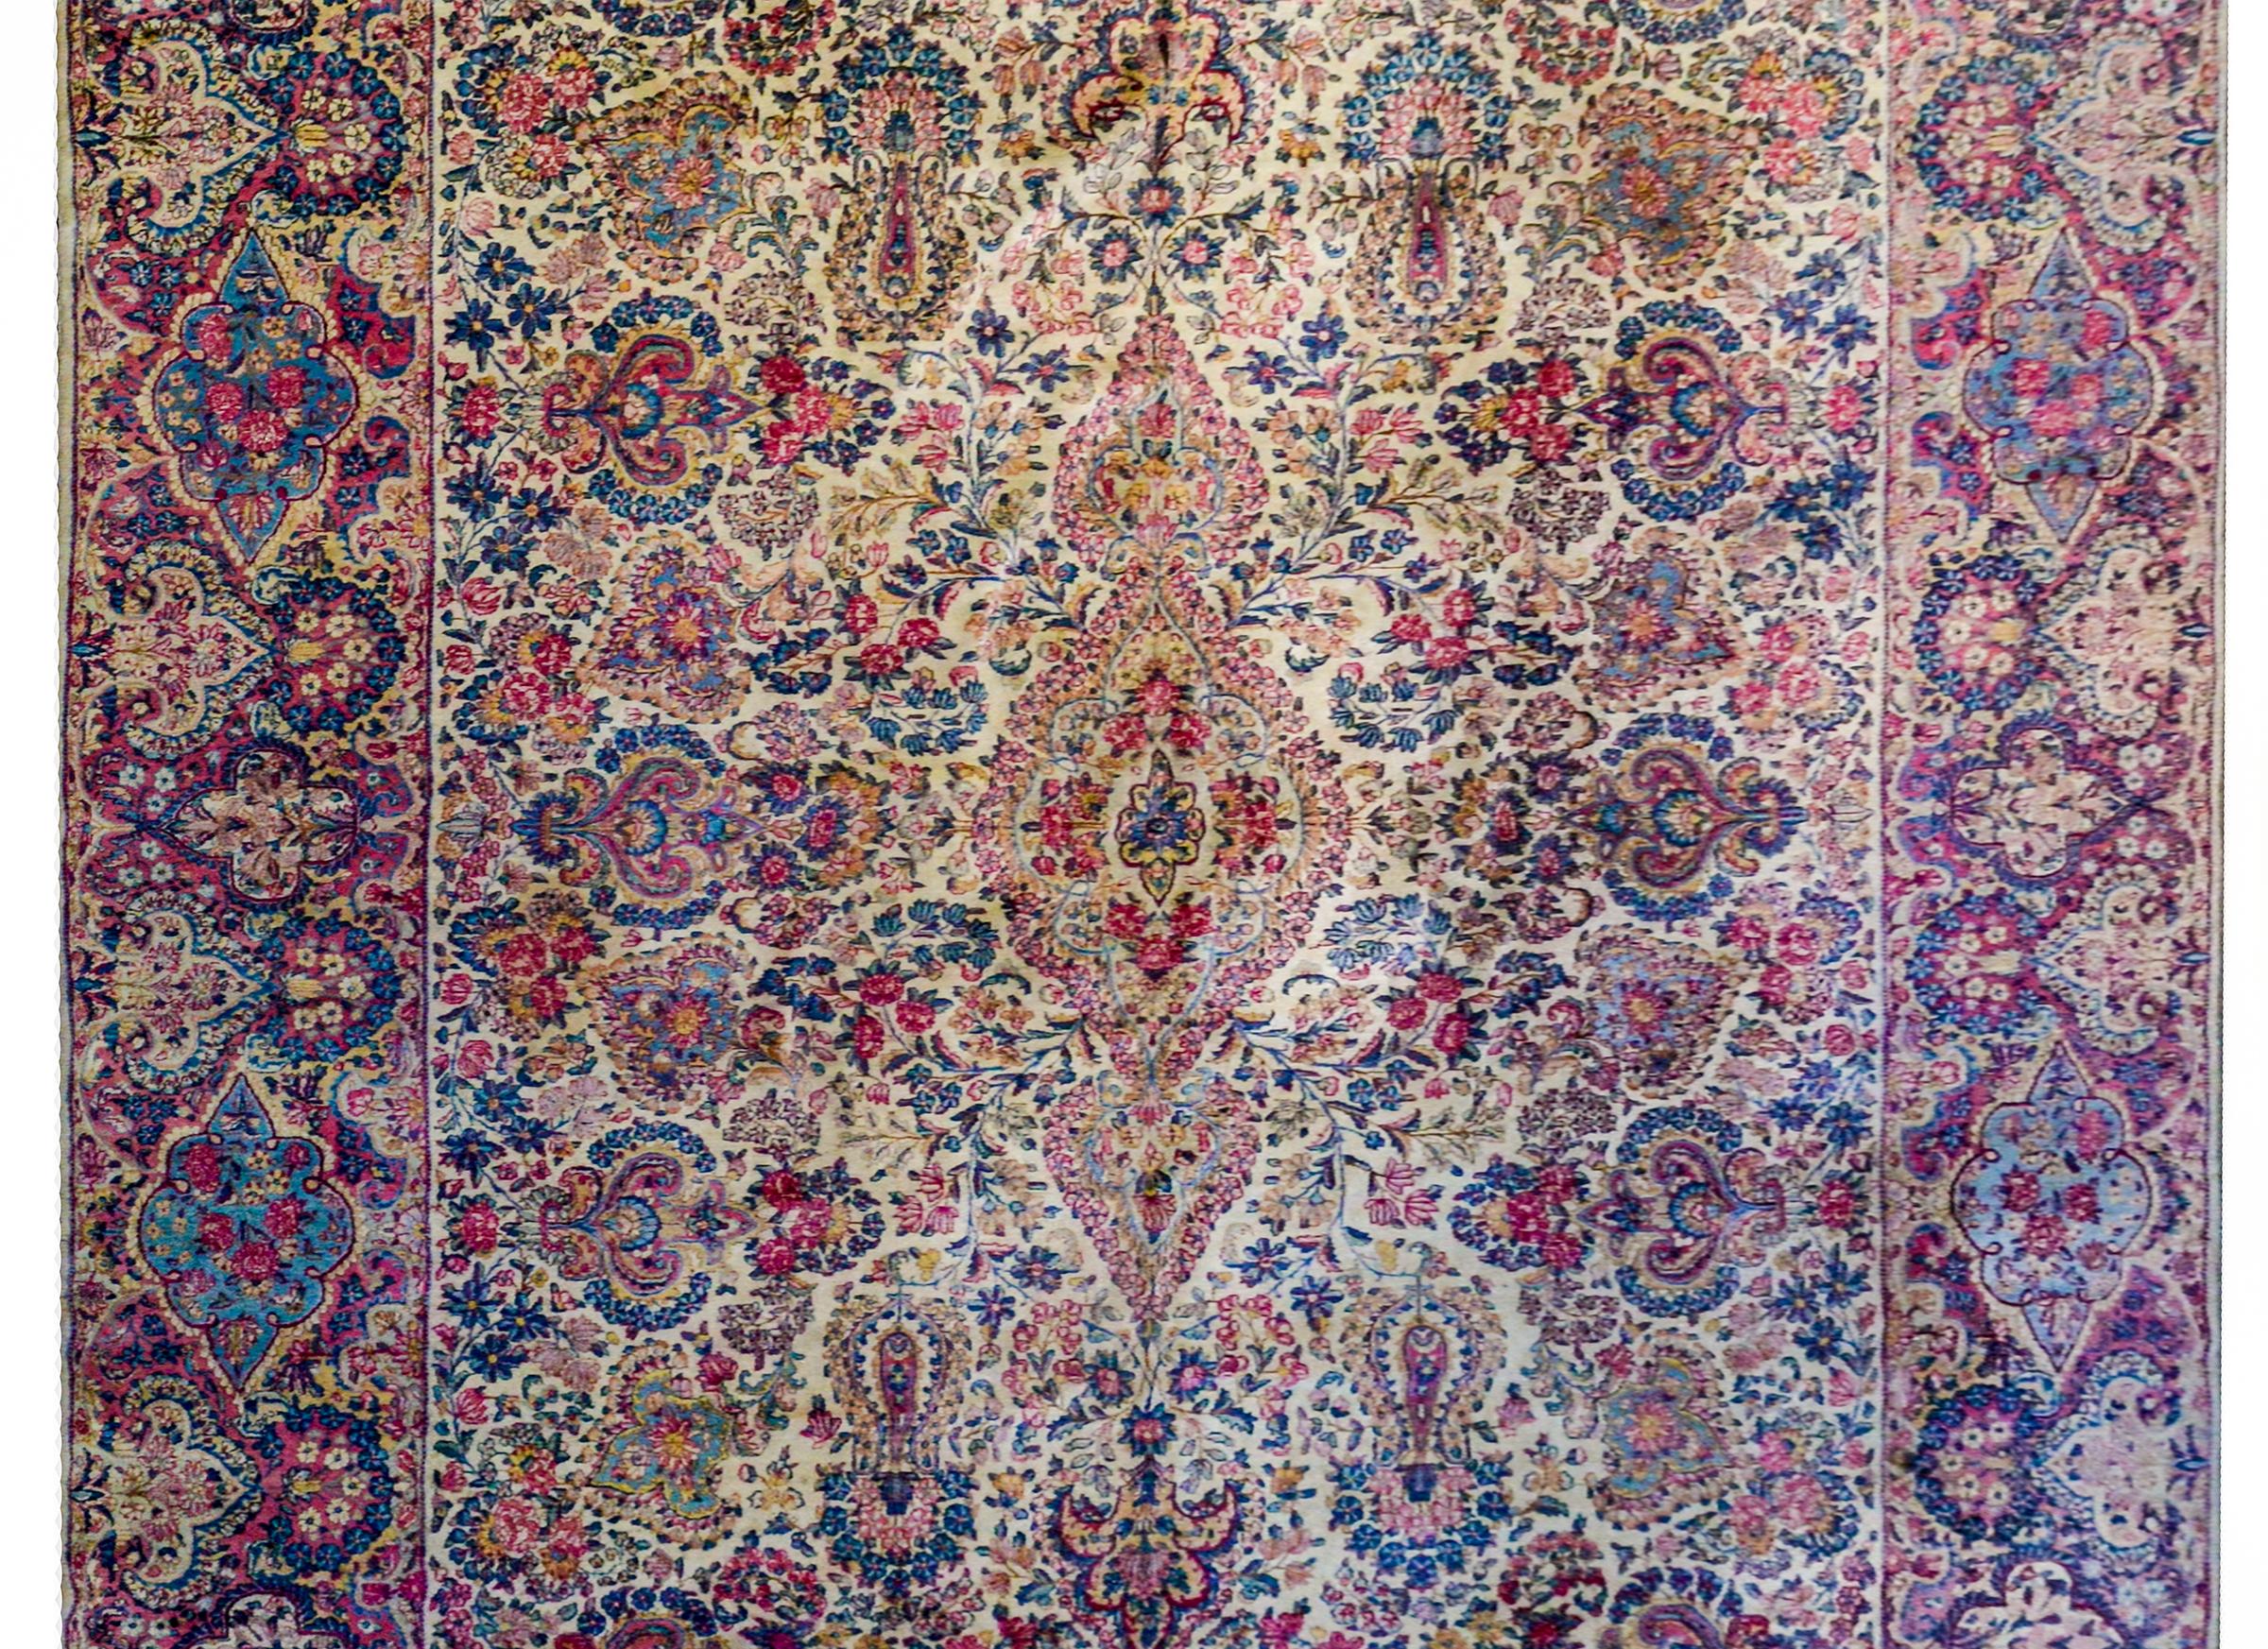 An exquisite early 20th century Persian Lavar Kirman rug with an elaborately woven multicolored design of scrolling vines with myriad flowers woven in light and dark indigo, crimson and rose, and gold vegetable dyed wool, on a cream colored wool